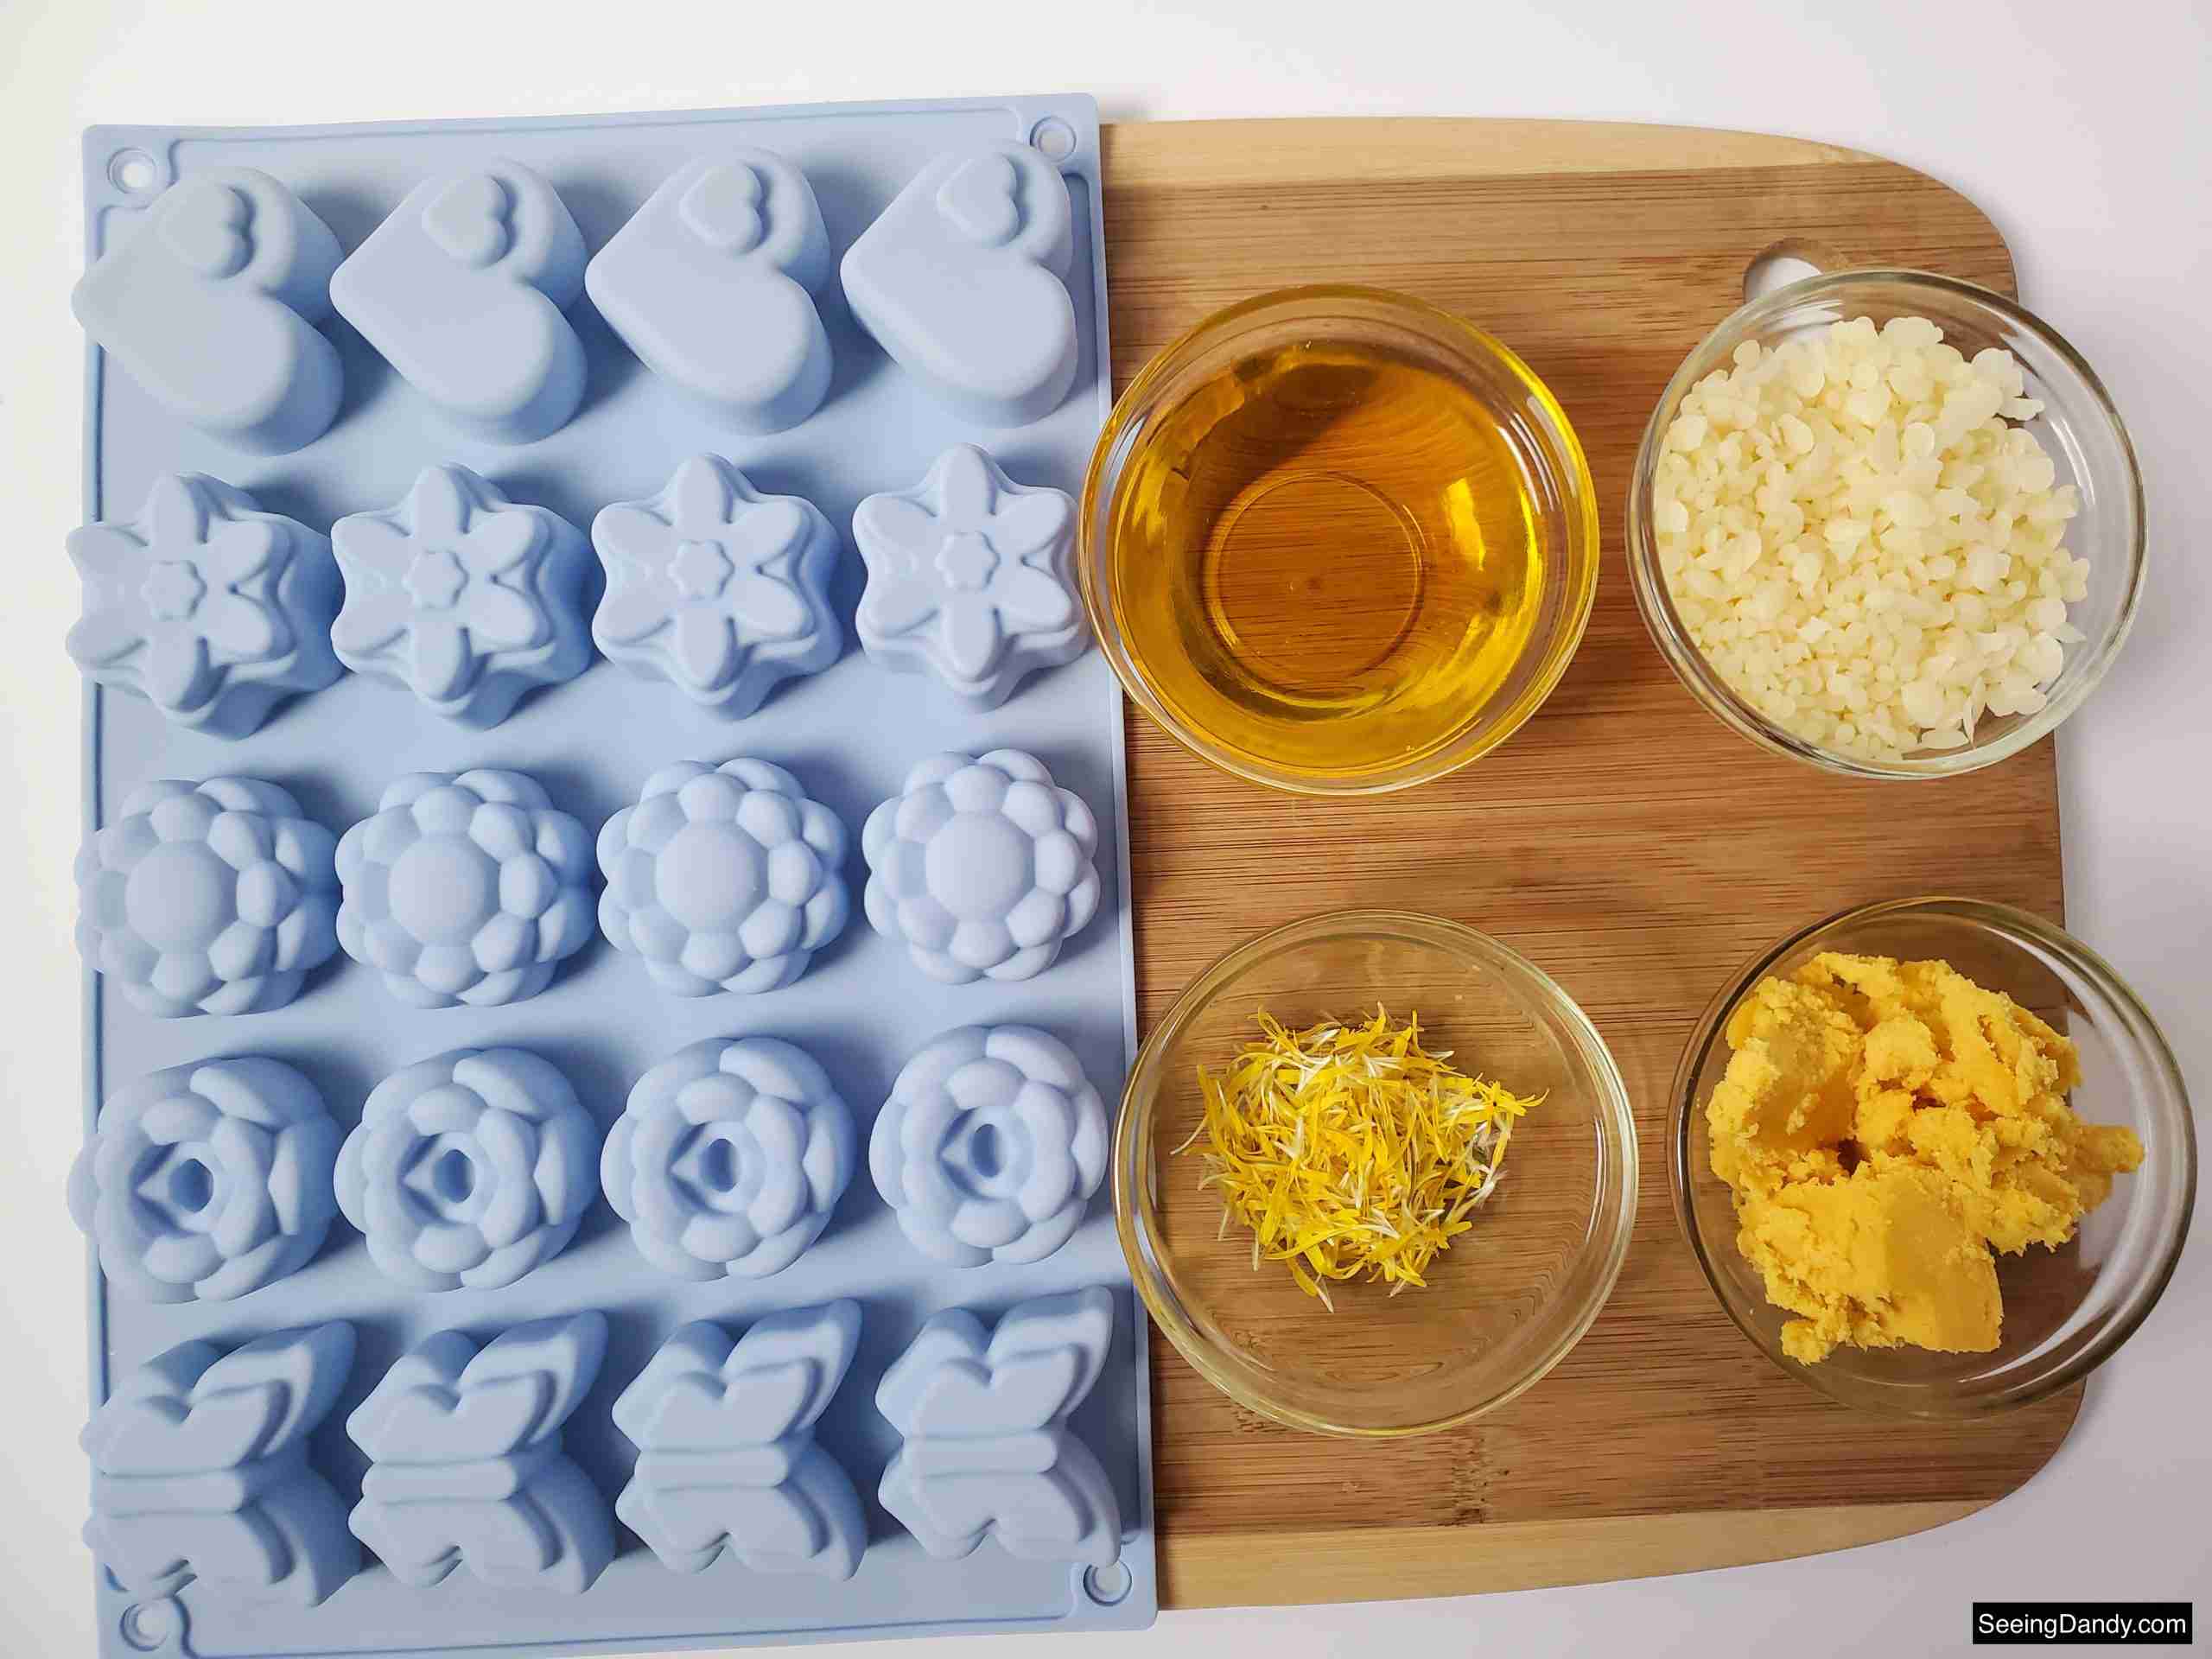 wood cutting board, glass mixing bowls, shea butter, beeswax, dandelion infused oil, fresh dandelion petals, silicone flower soap mold